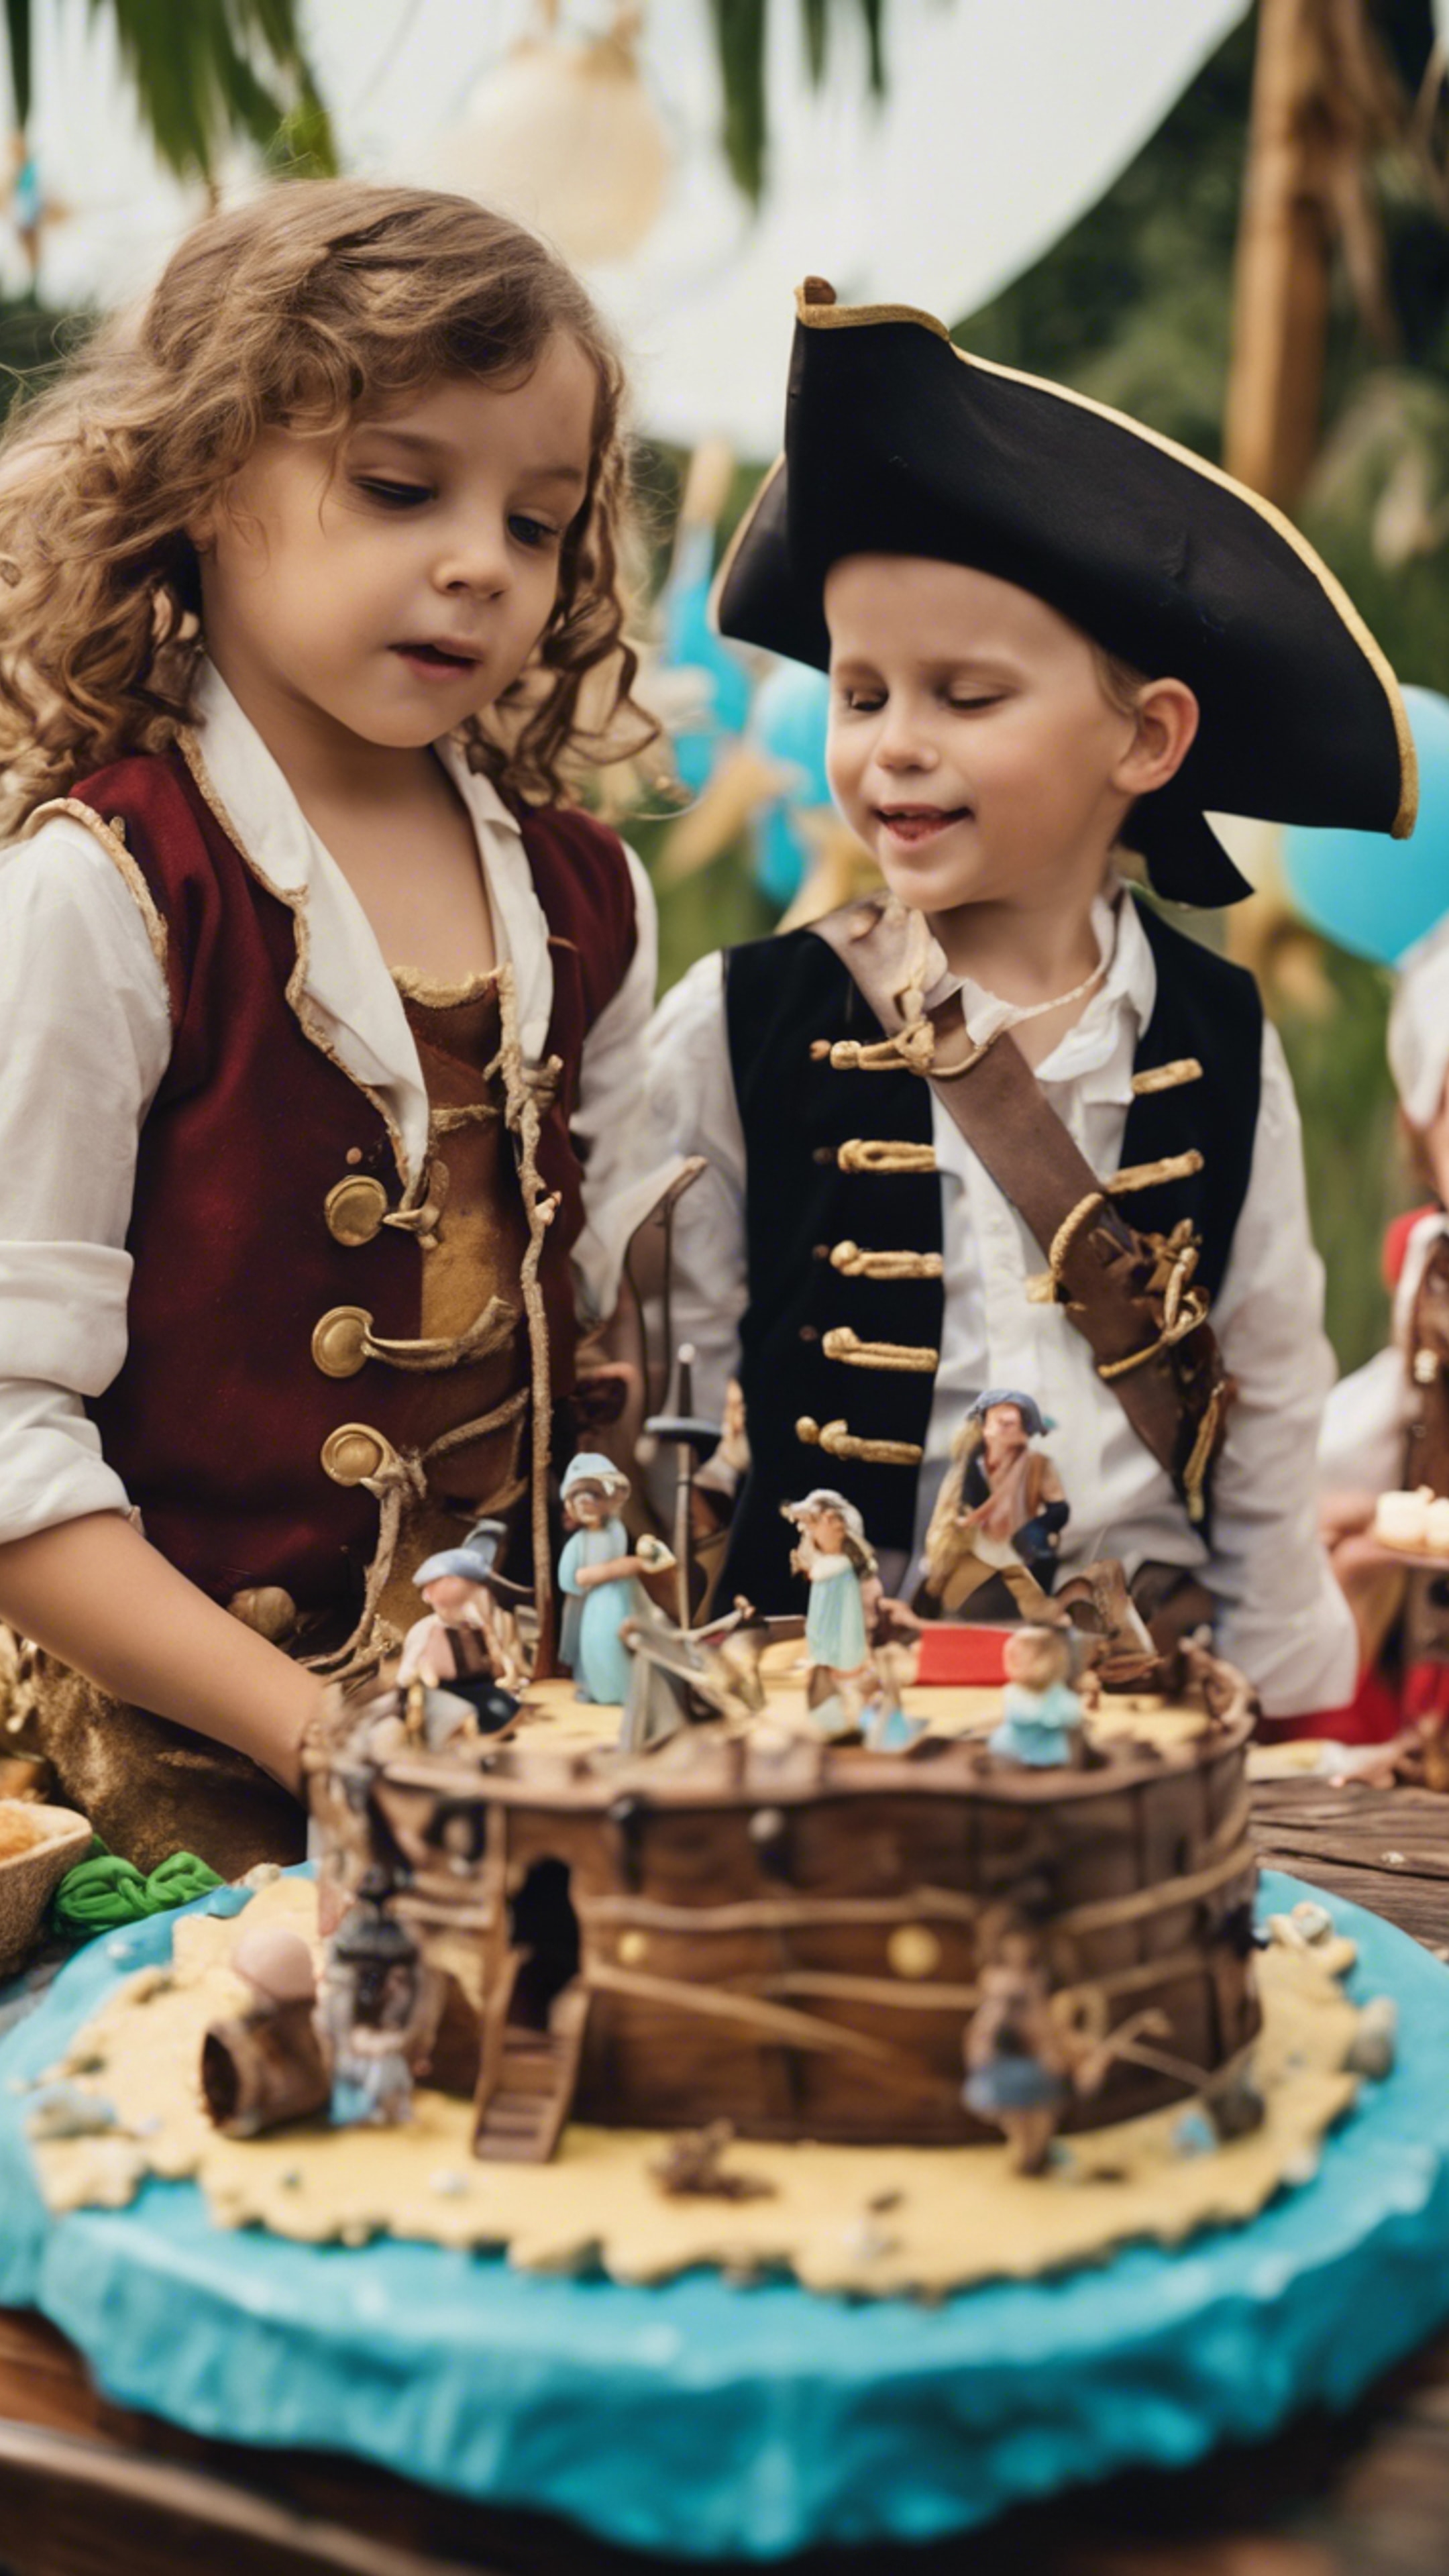 Children's pirate-themed birthday party with a treasure map, pirate ship cake and kids dressed as pirates. 牆紙[fc1a6e05b86643309d7a]